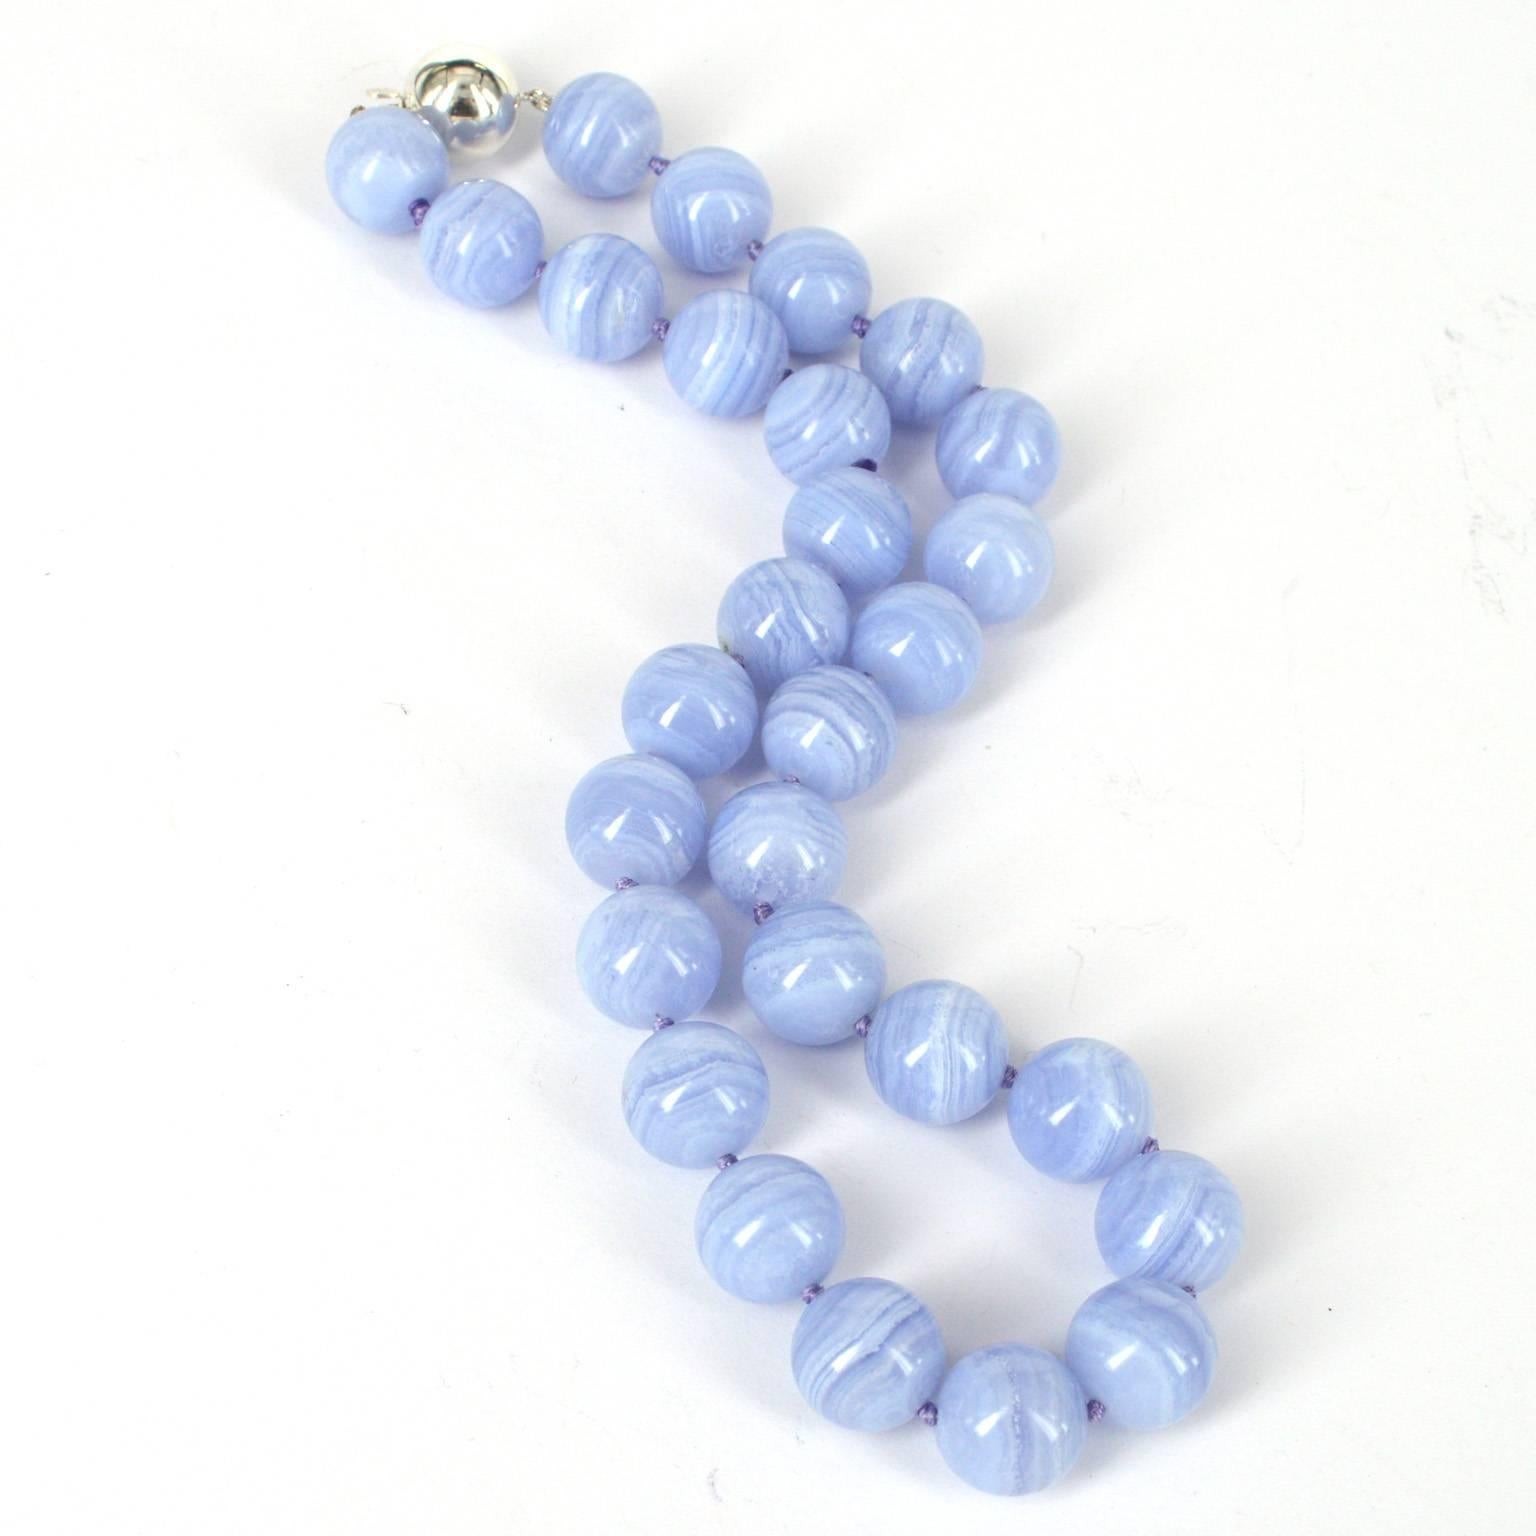 Statement strand of 28 high quality 14mm polished Blue Lace agate beads hand knotted on matching blue thread with a 14mm round Sterling Silver clasp. 
Finished necklace measures 46cm.
Matching bracelet and Earrings can also be ordered, necklace